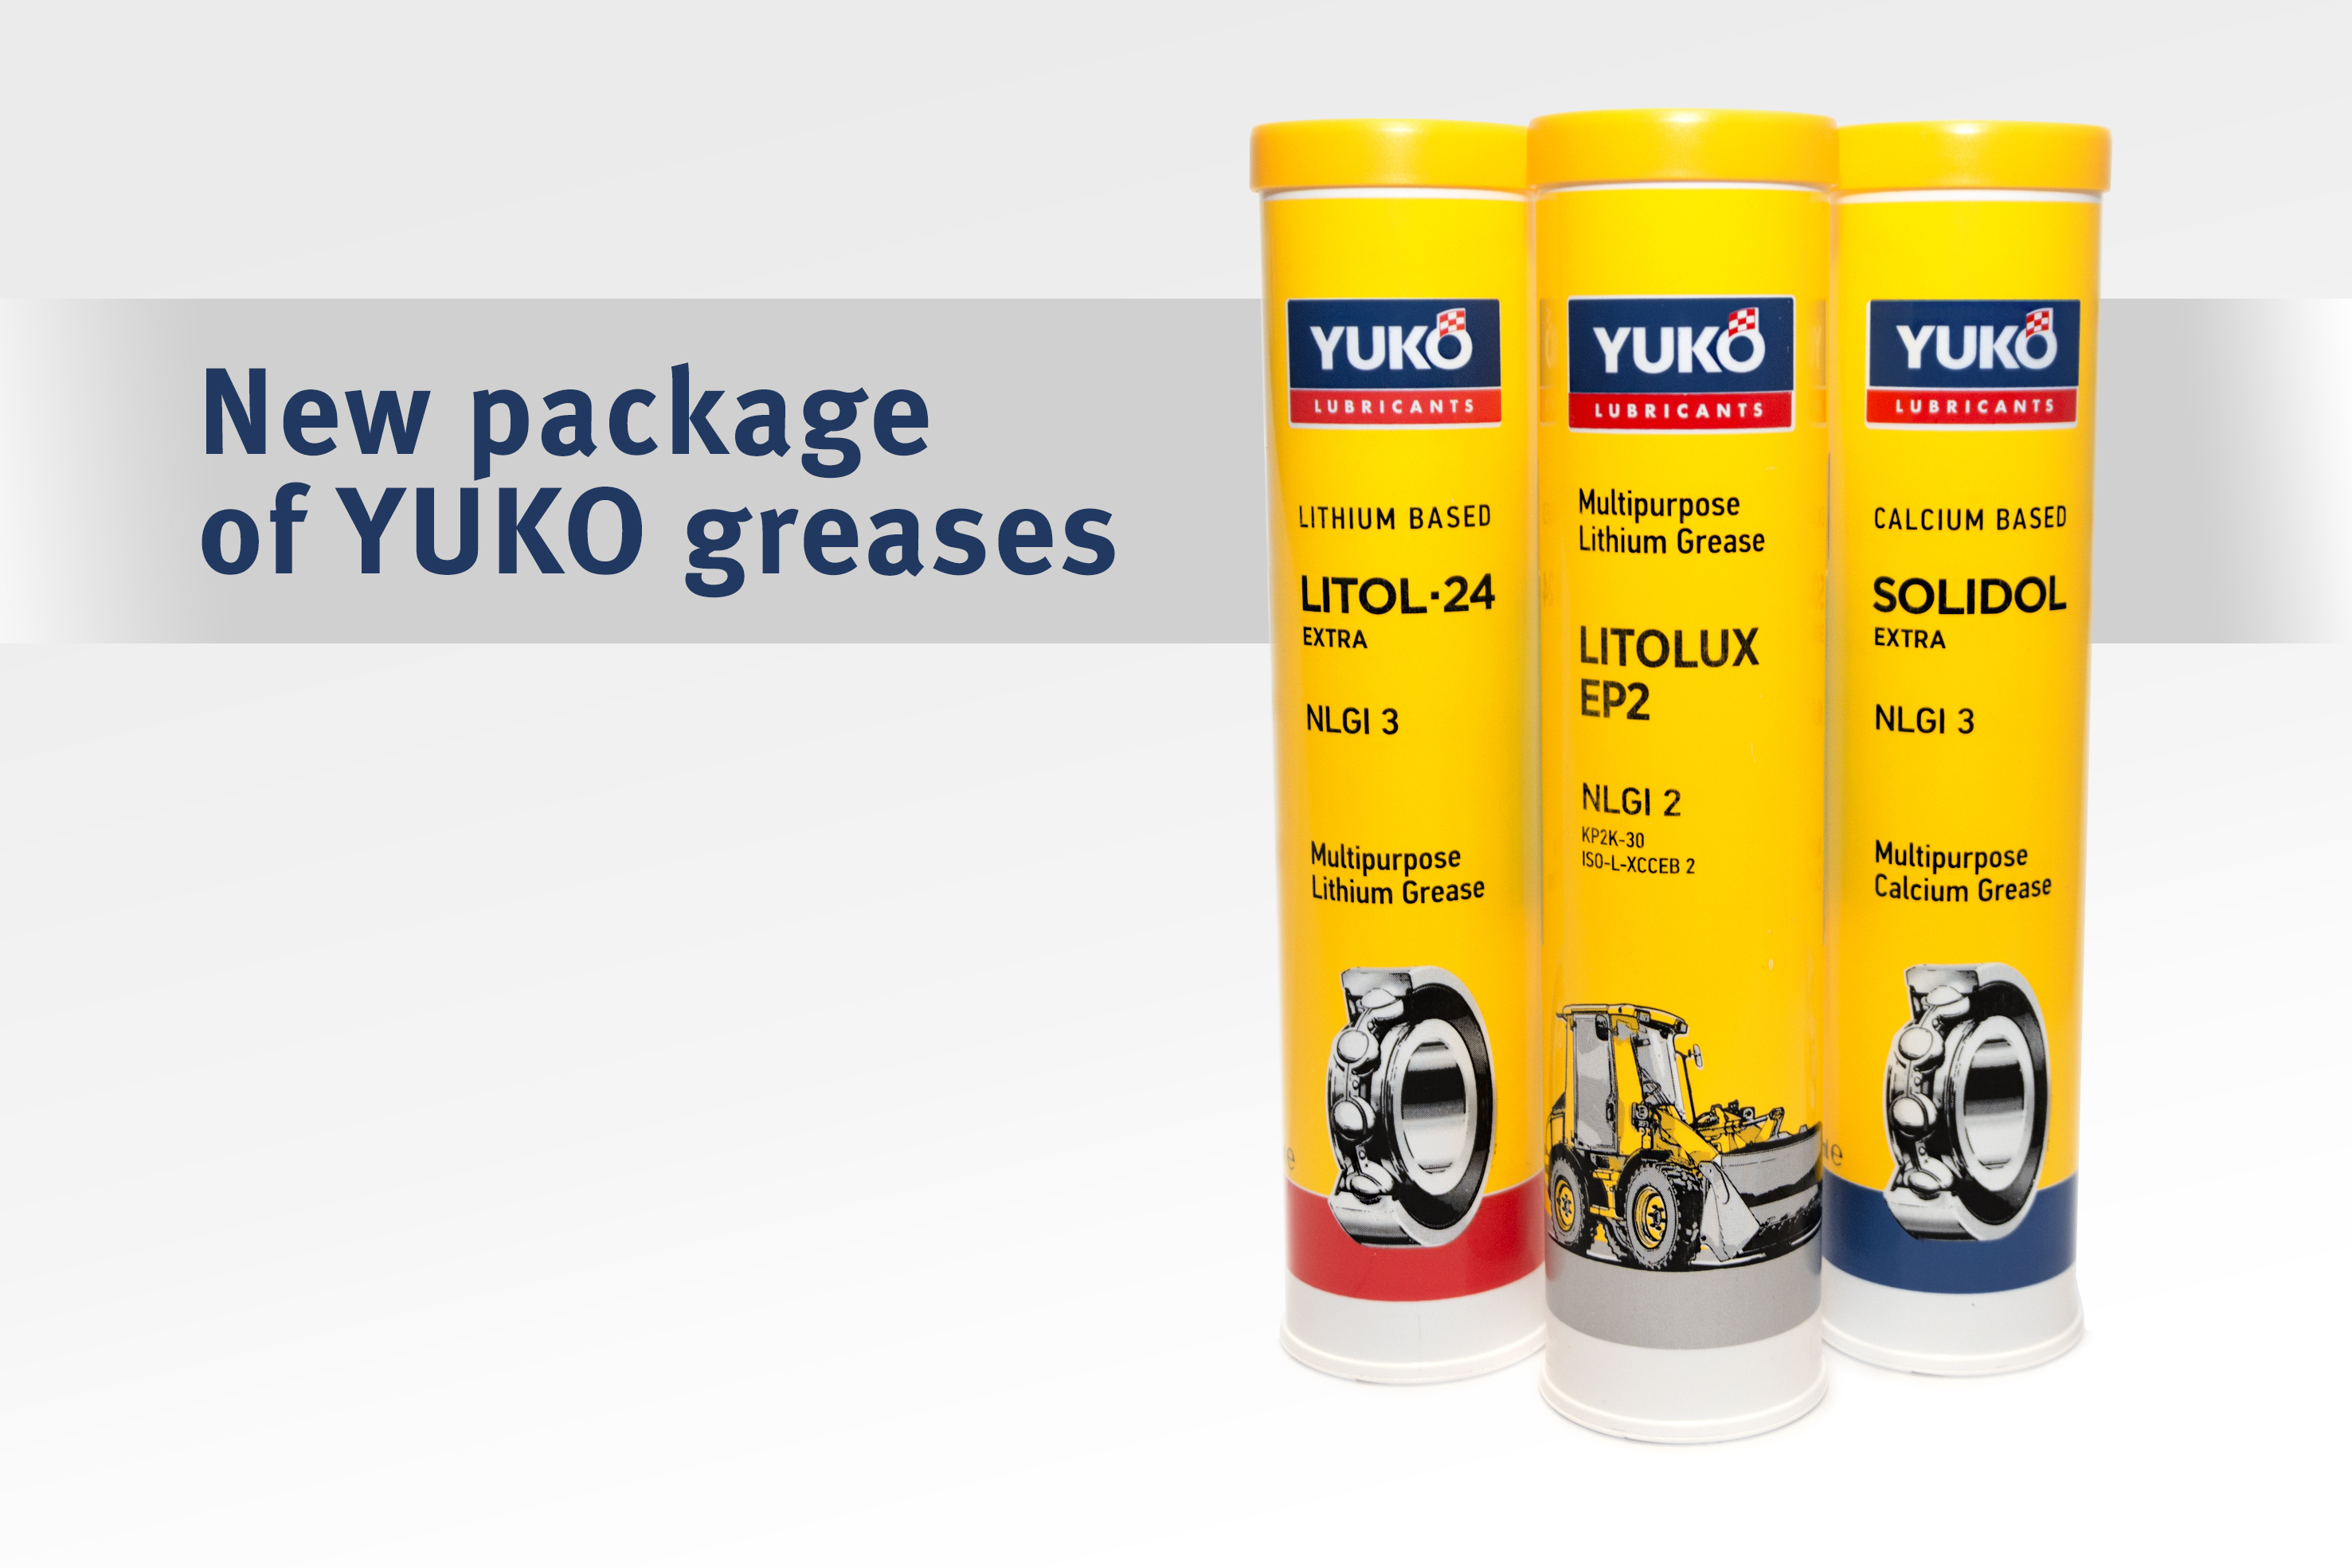 Popular YUKO greases has got a new packaging.